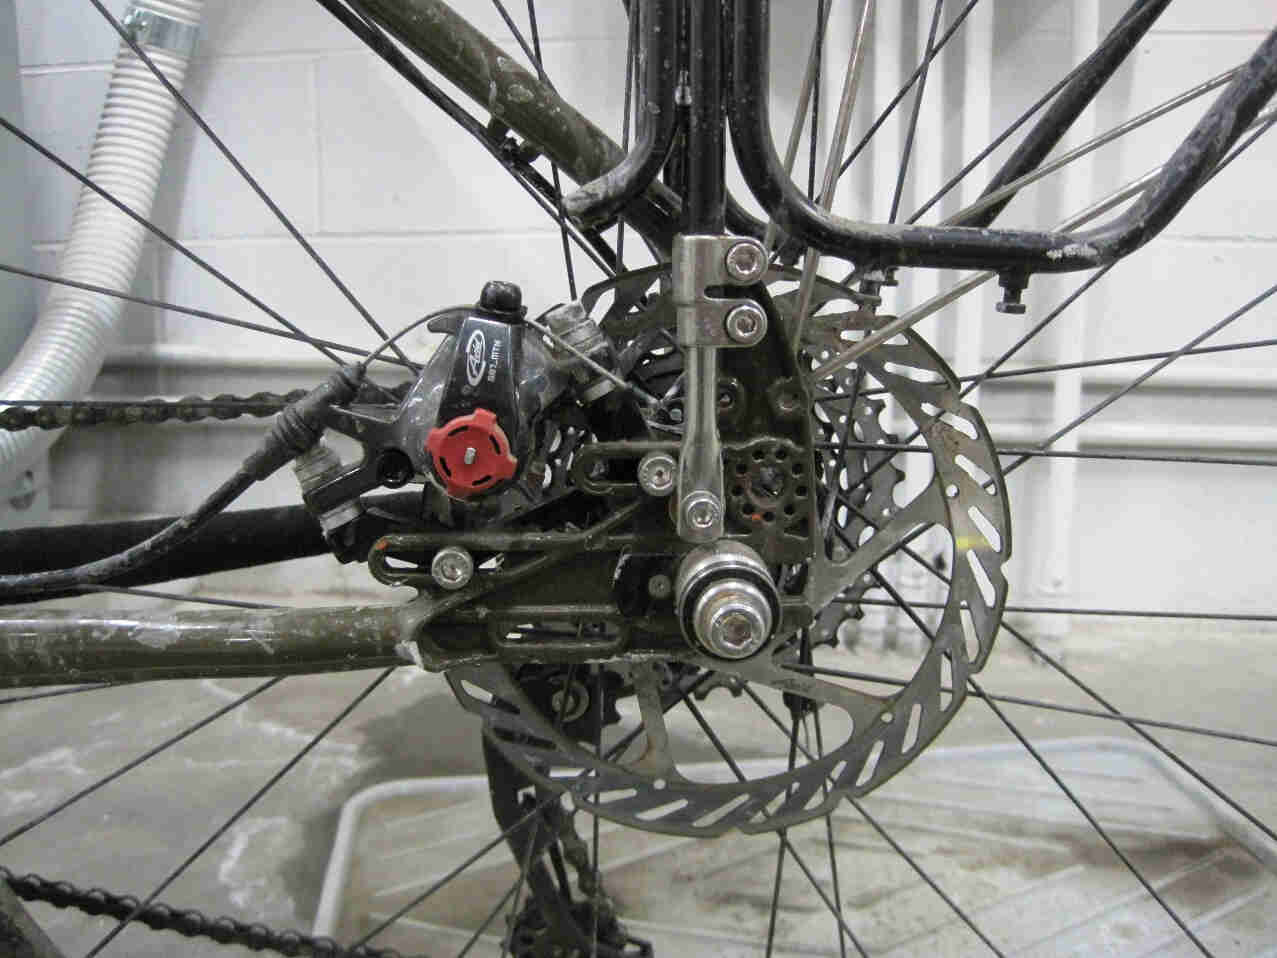 Left side view of the rear brakes disc and caliper on a Surly Troll bike, on a cement floor inside a warehouse